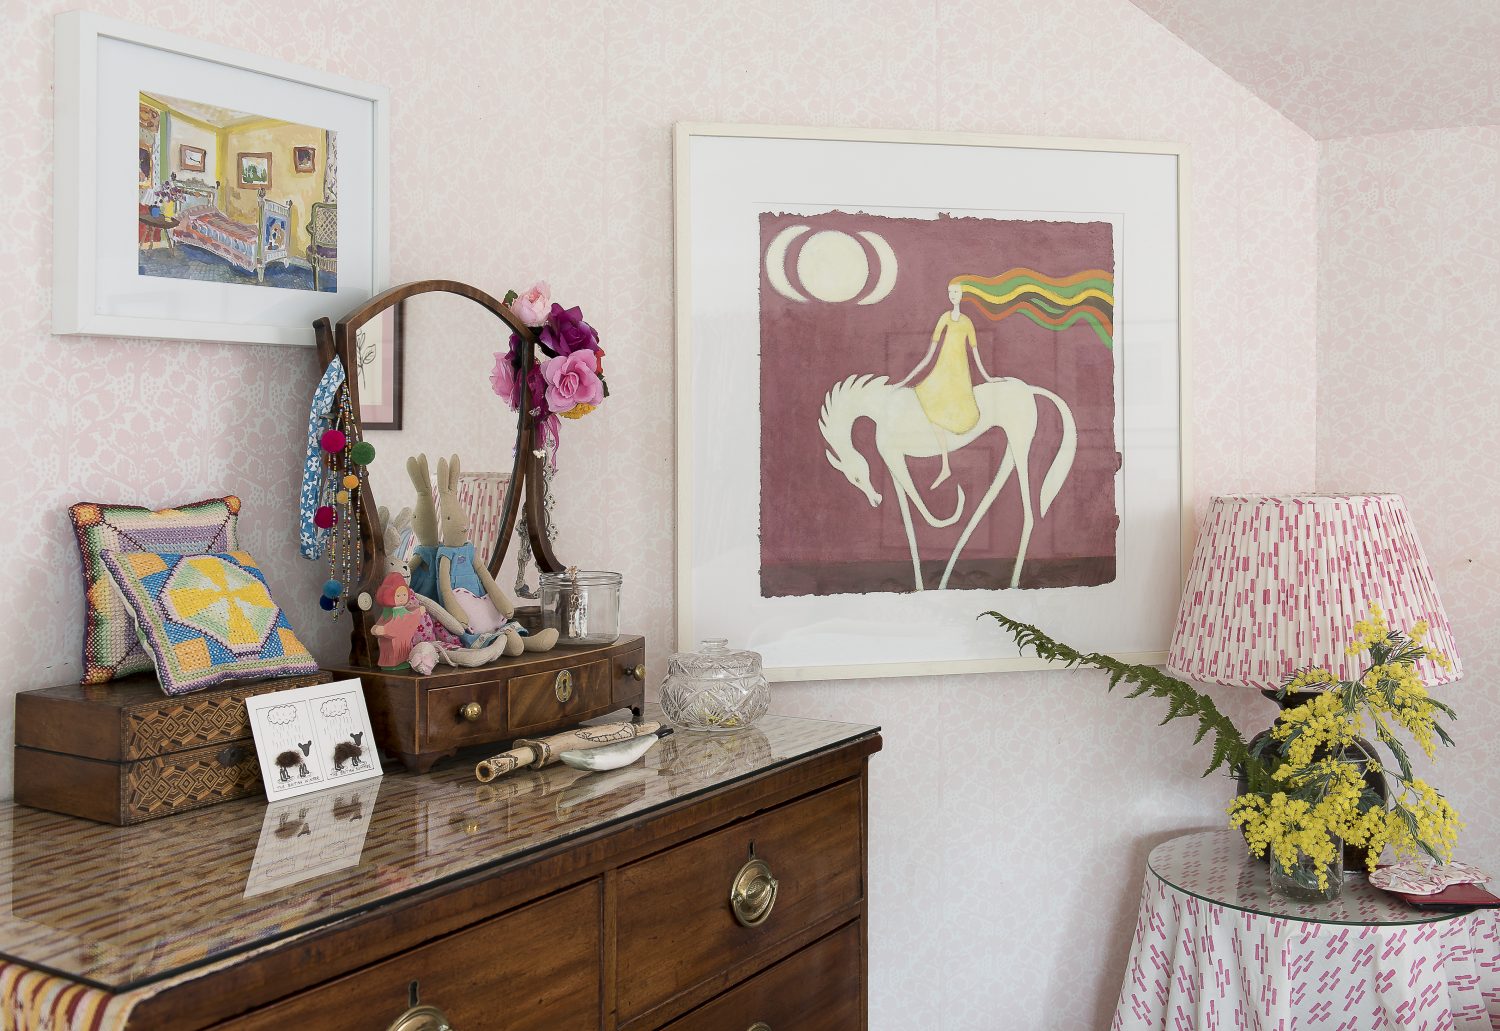 Hanging over the dressing table is a painting by Molly’s friend Lottie Cole